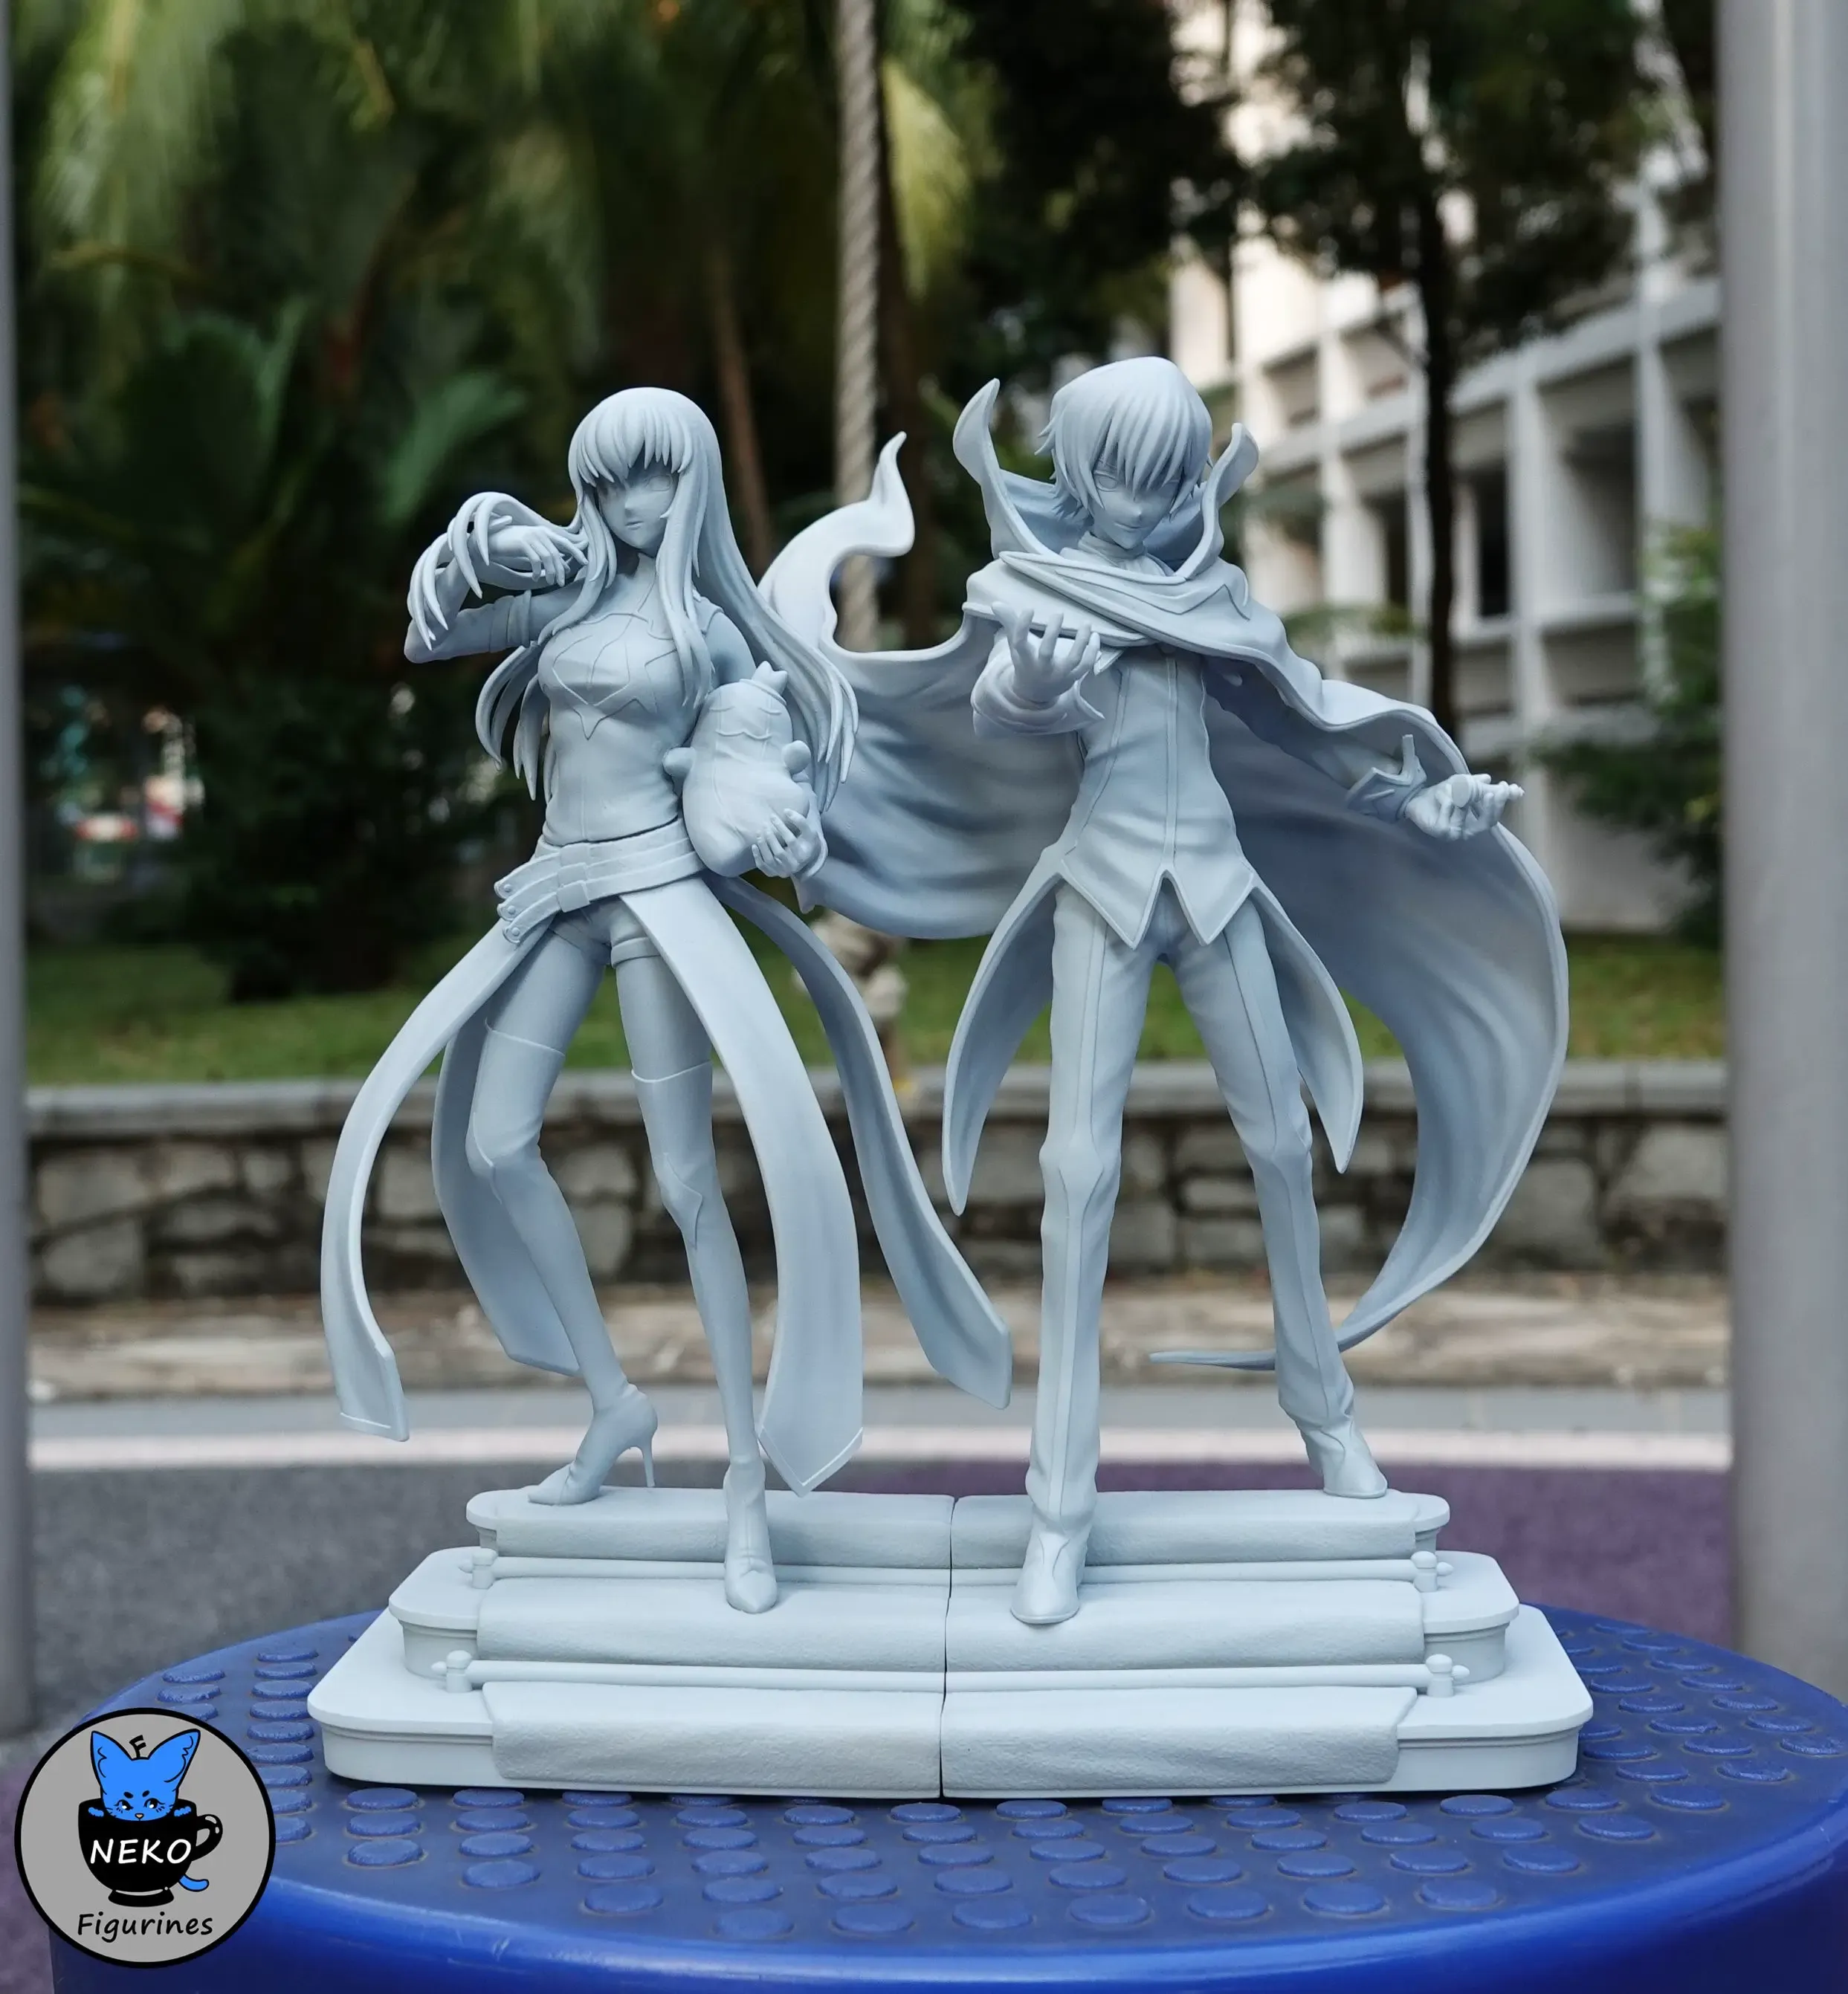 Lelouch and C.C - CODE GEASS Anime Figurine for 3D Printing